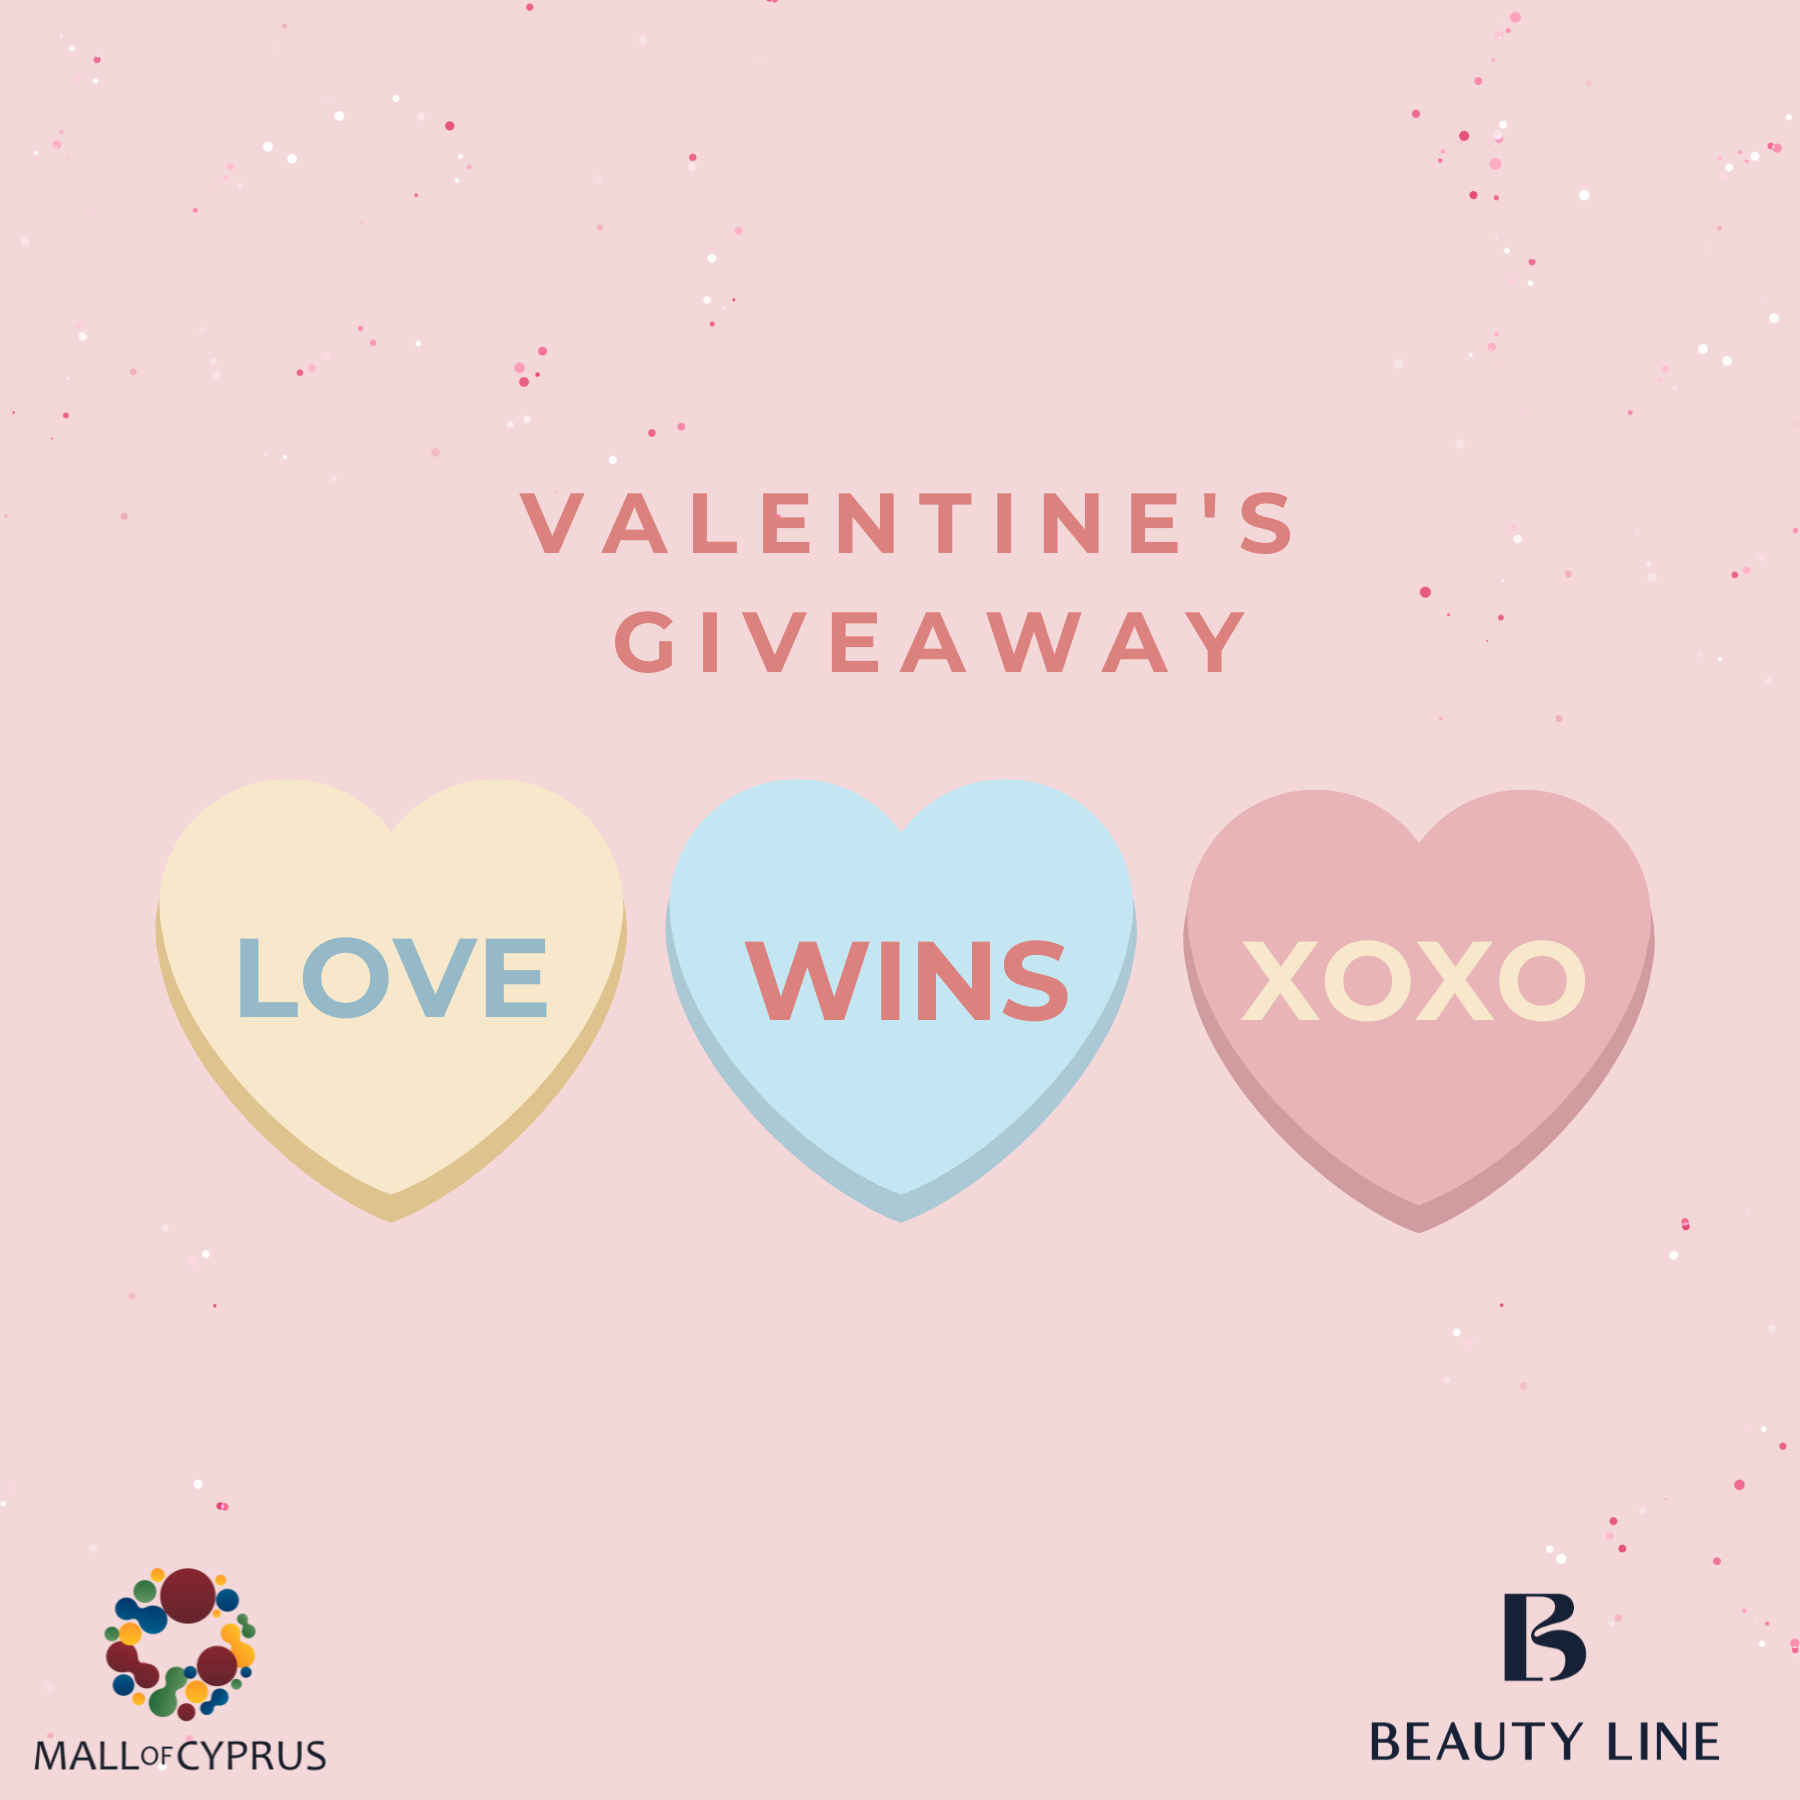 Valentines Instagram Competition with Beauty Line